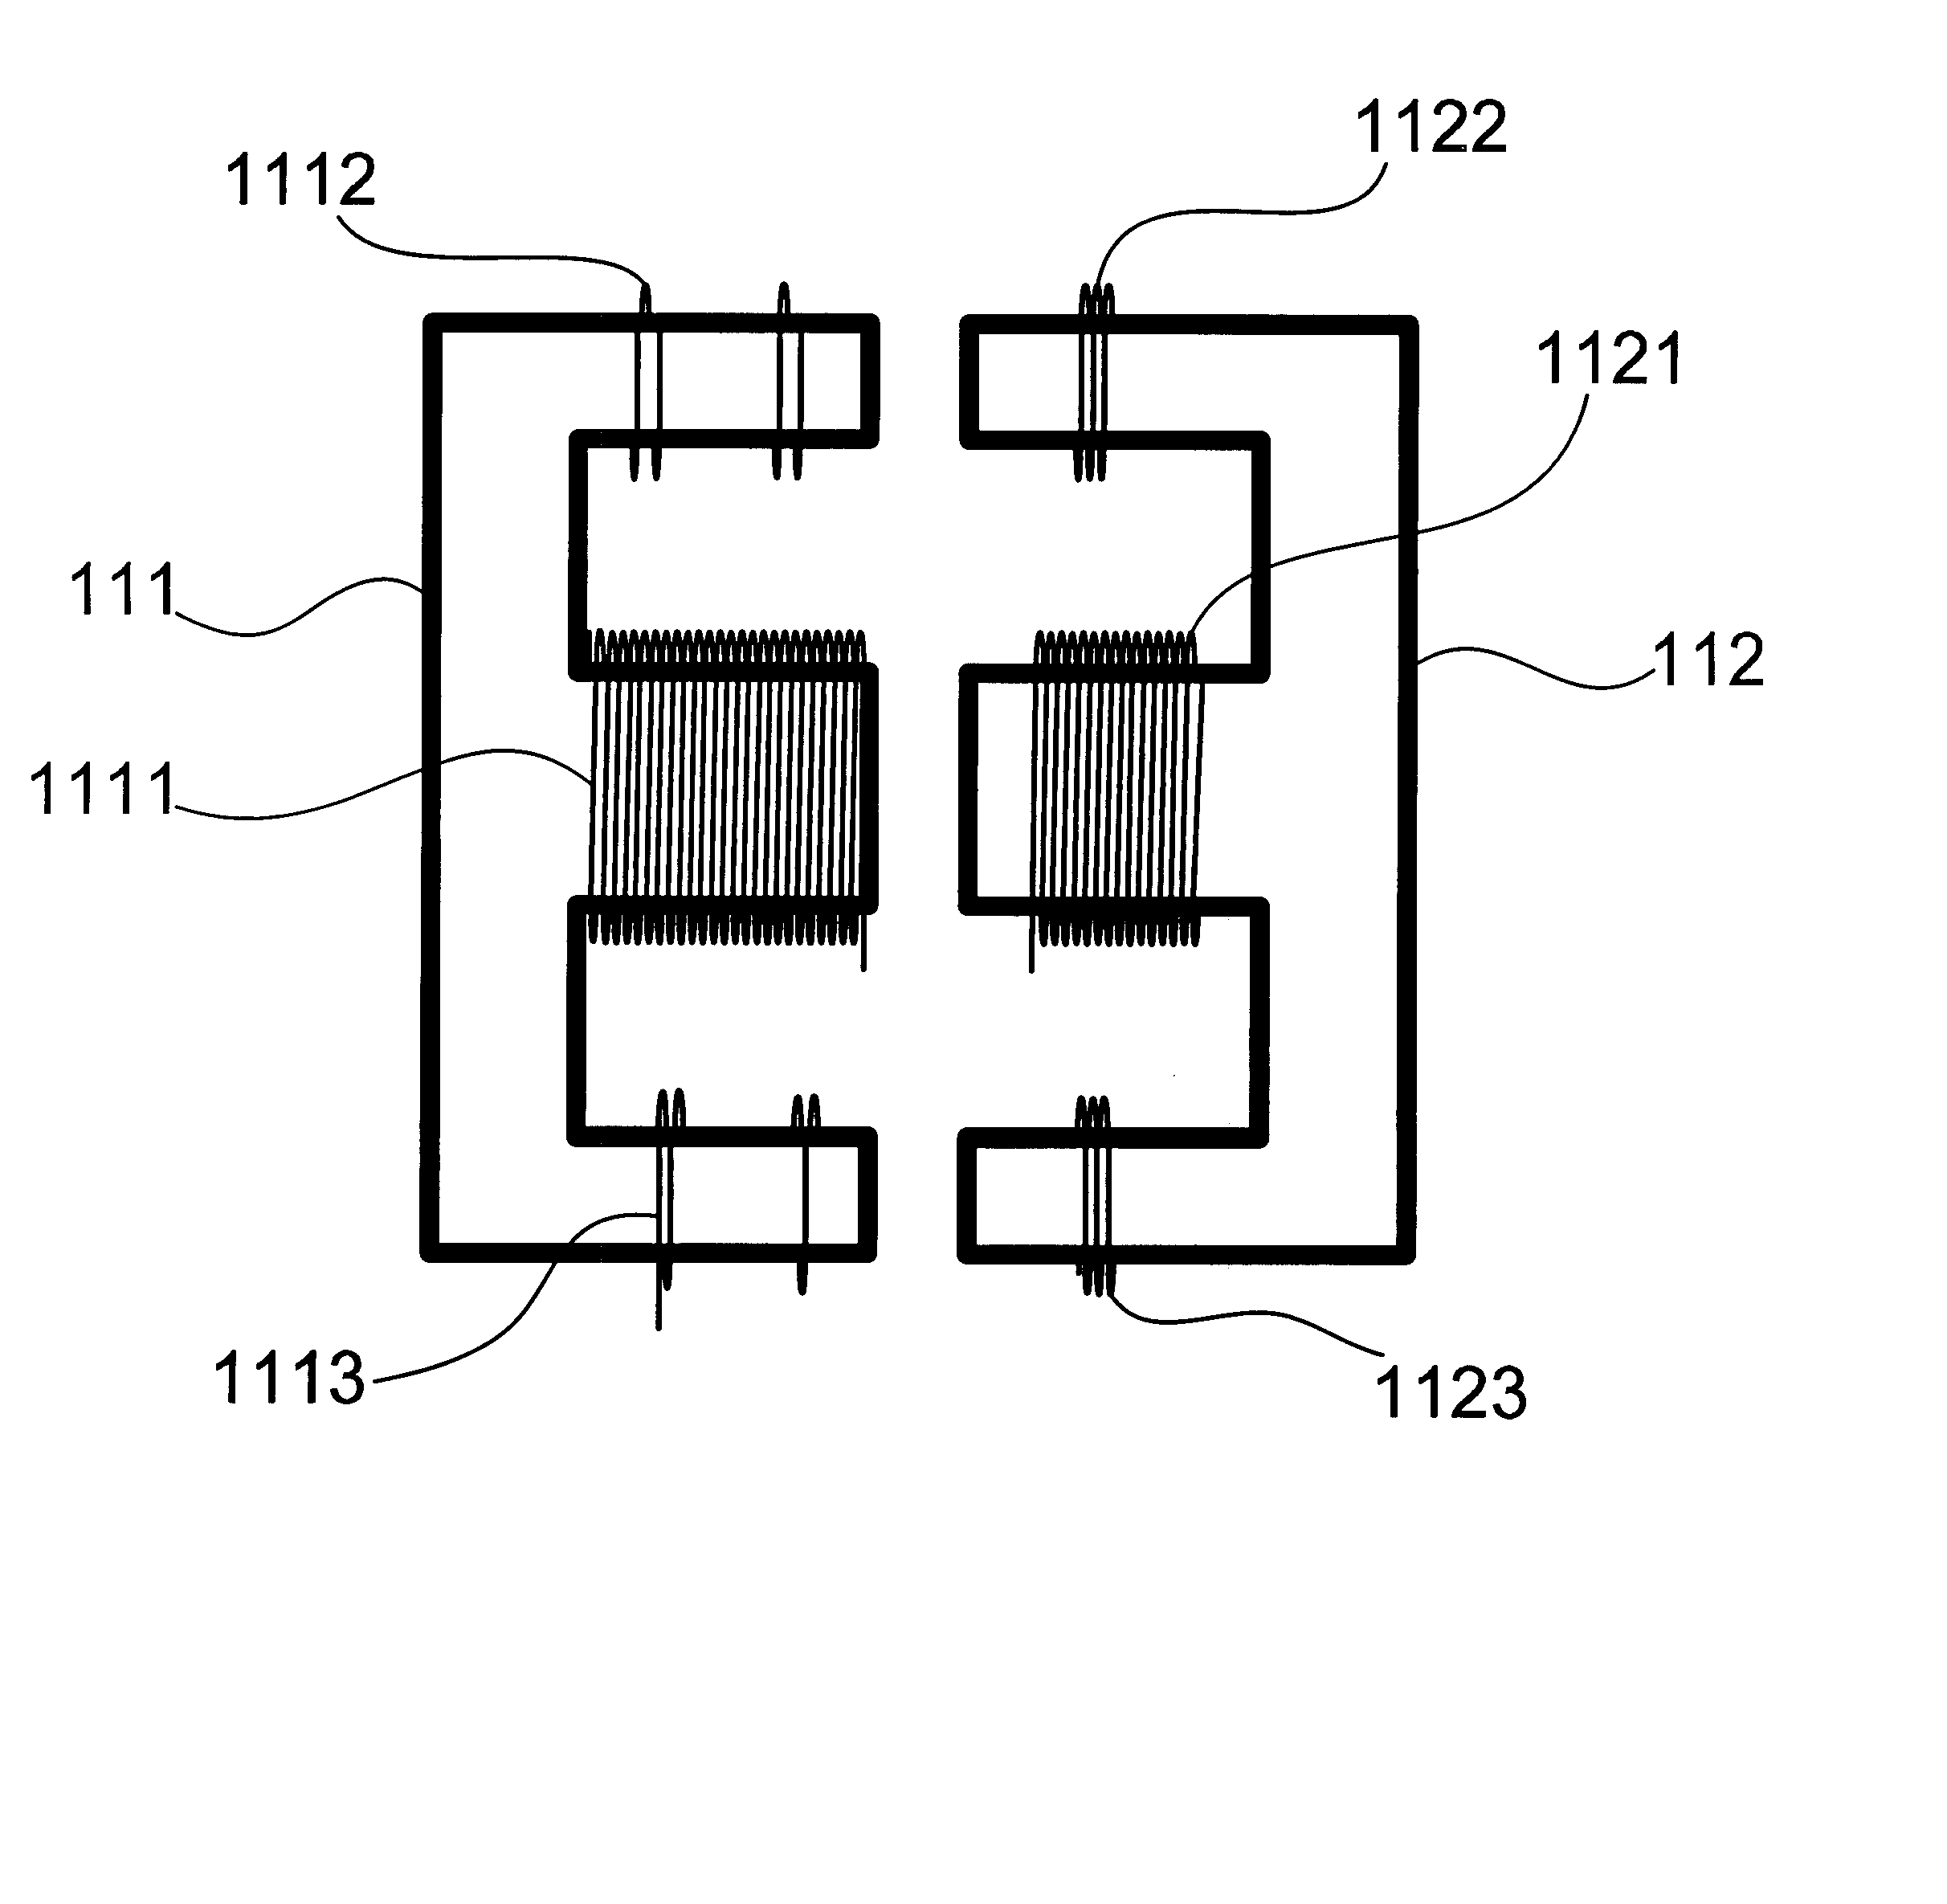 Non-contact power system with load and gap detection